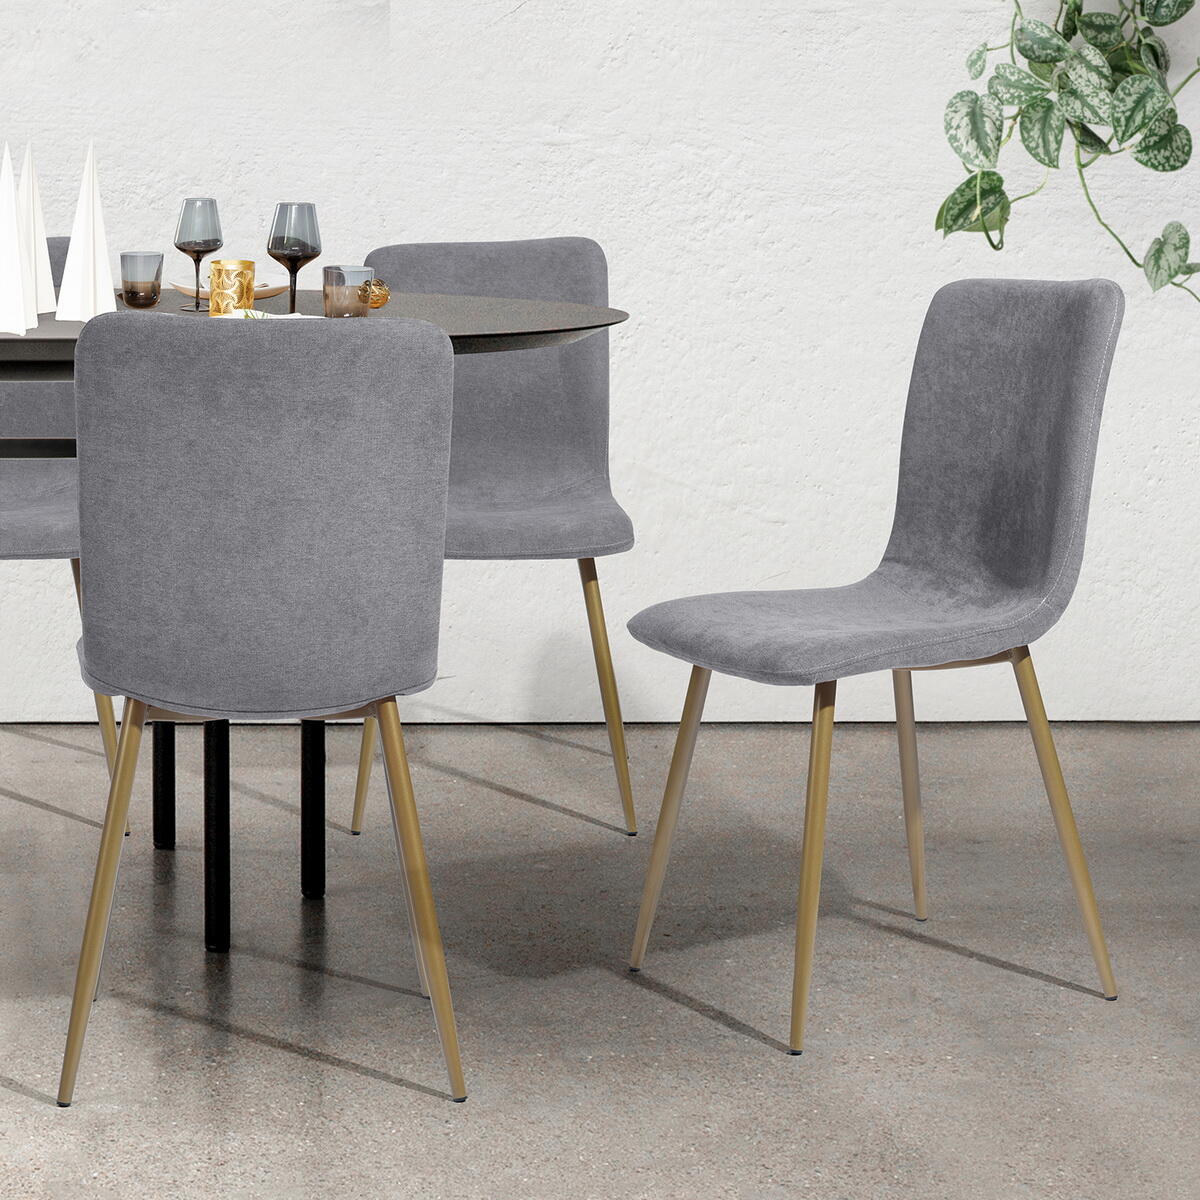 Scargill Gray Upholstered Textured Fabric Dining Chairs (Set of 4) 7513